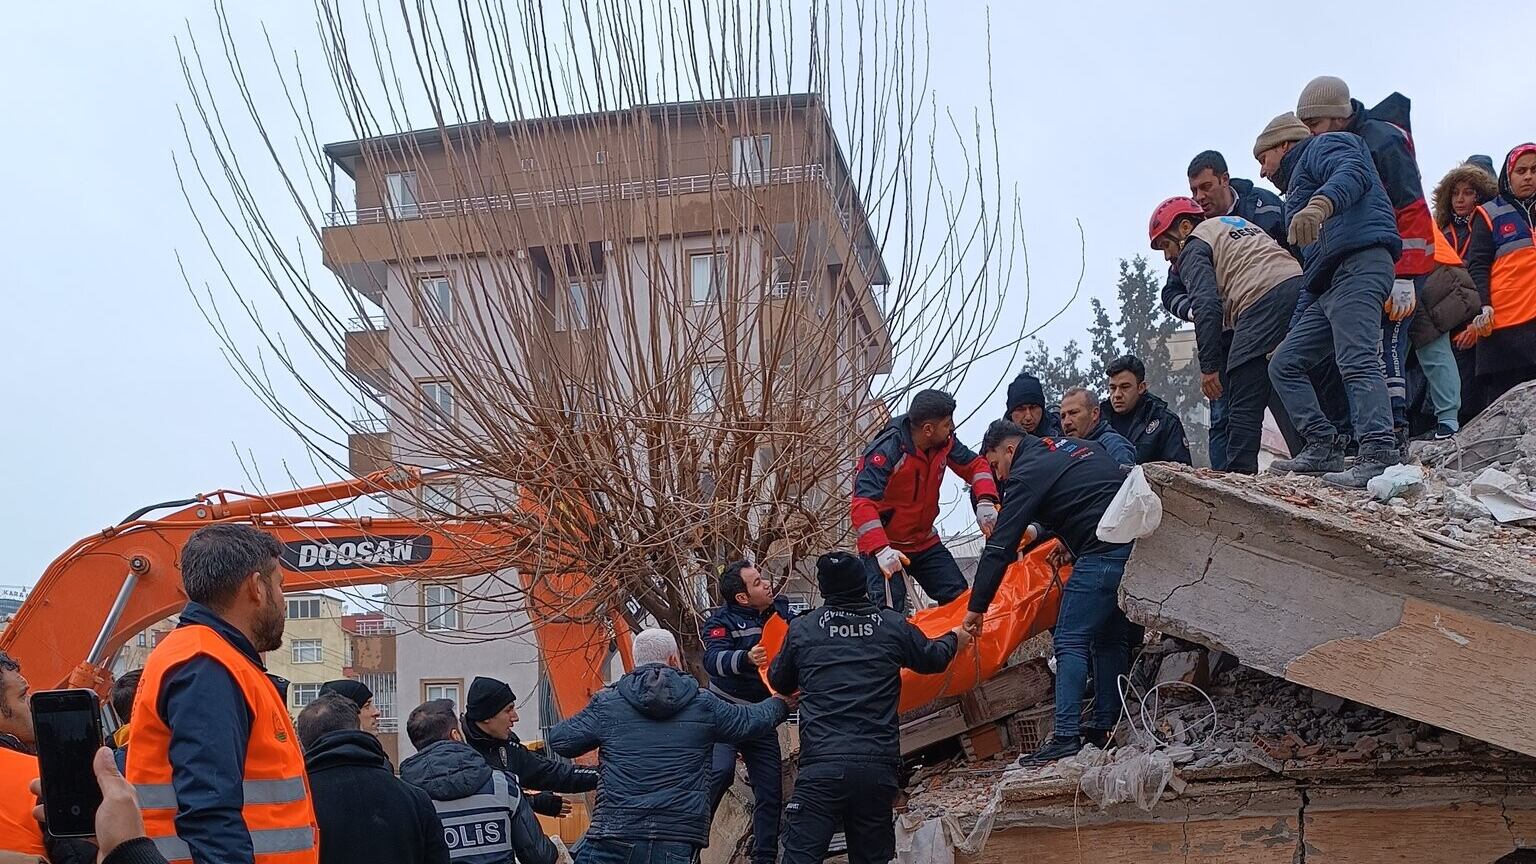 Photo taken with permission from the Twitter account @mehmetyetim63 of police and volunteers removing a body from a collapsed building in Sanliurfa, Turkey, following an earthquake 